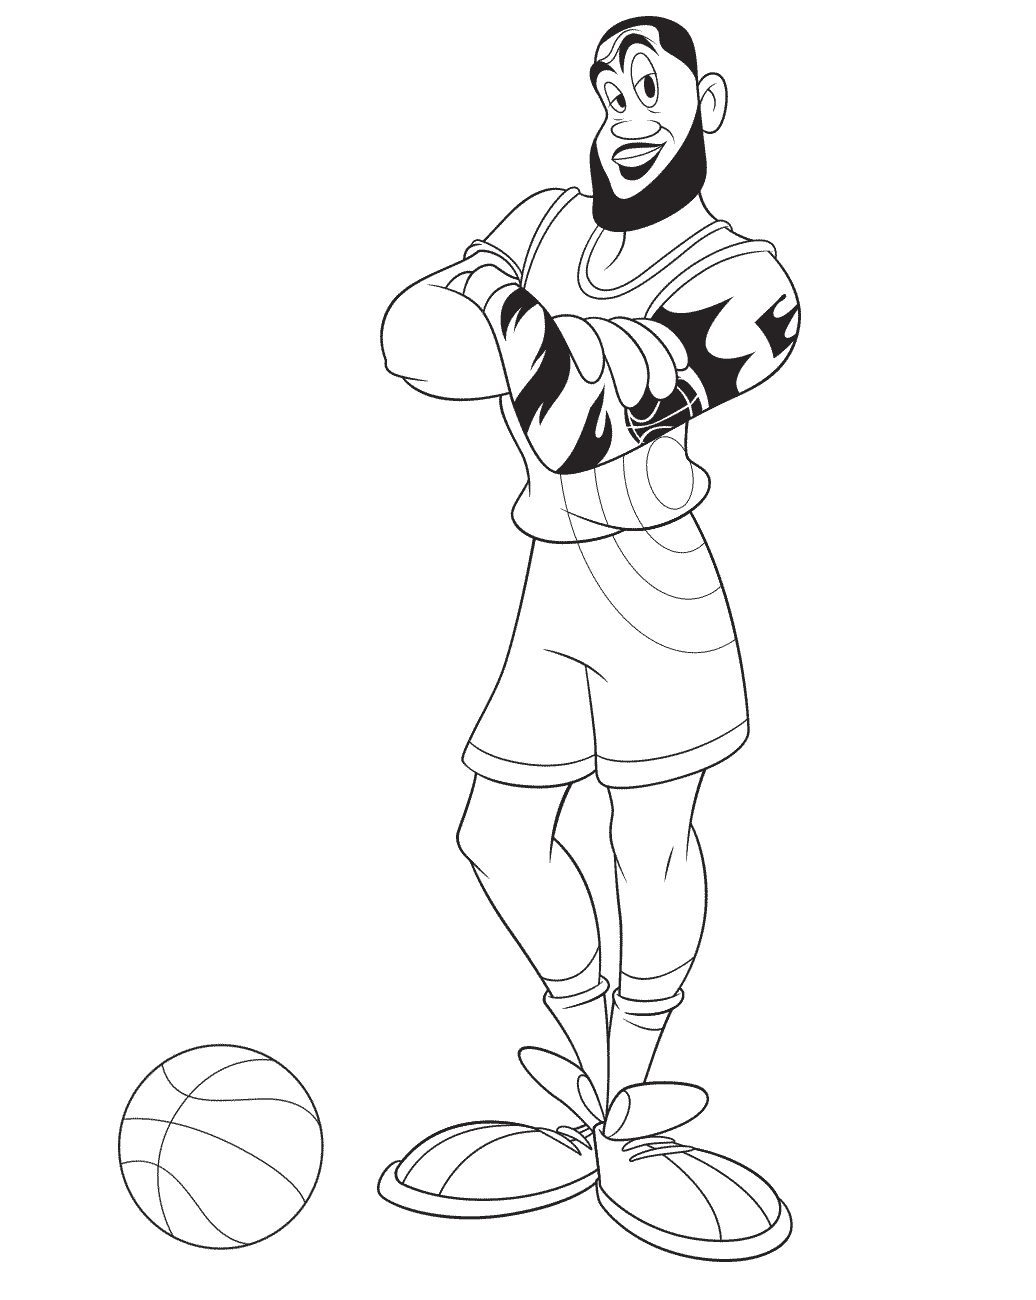 LeBron James Coloring Page From Space Jam A New Legacy